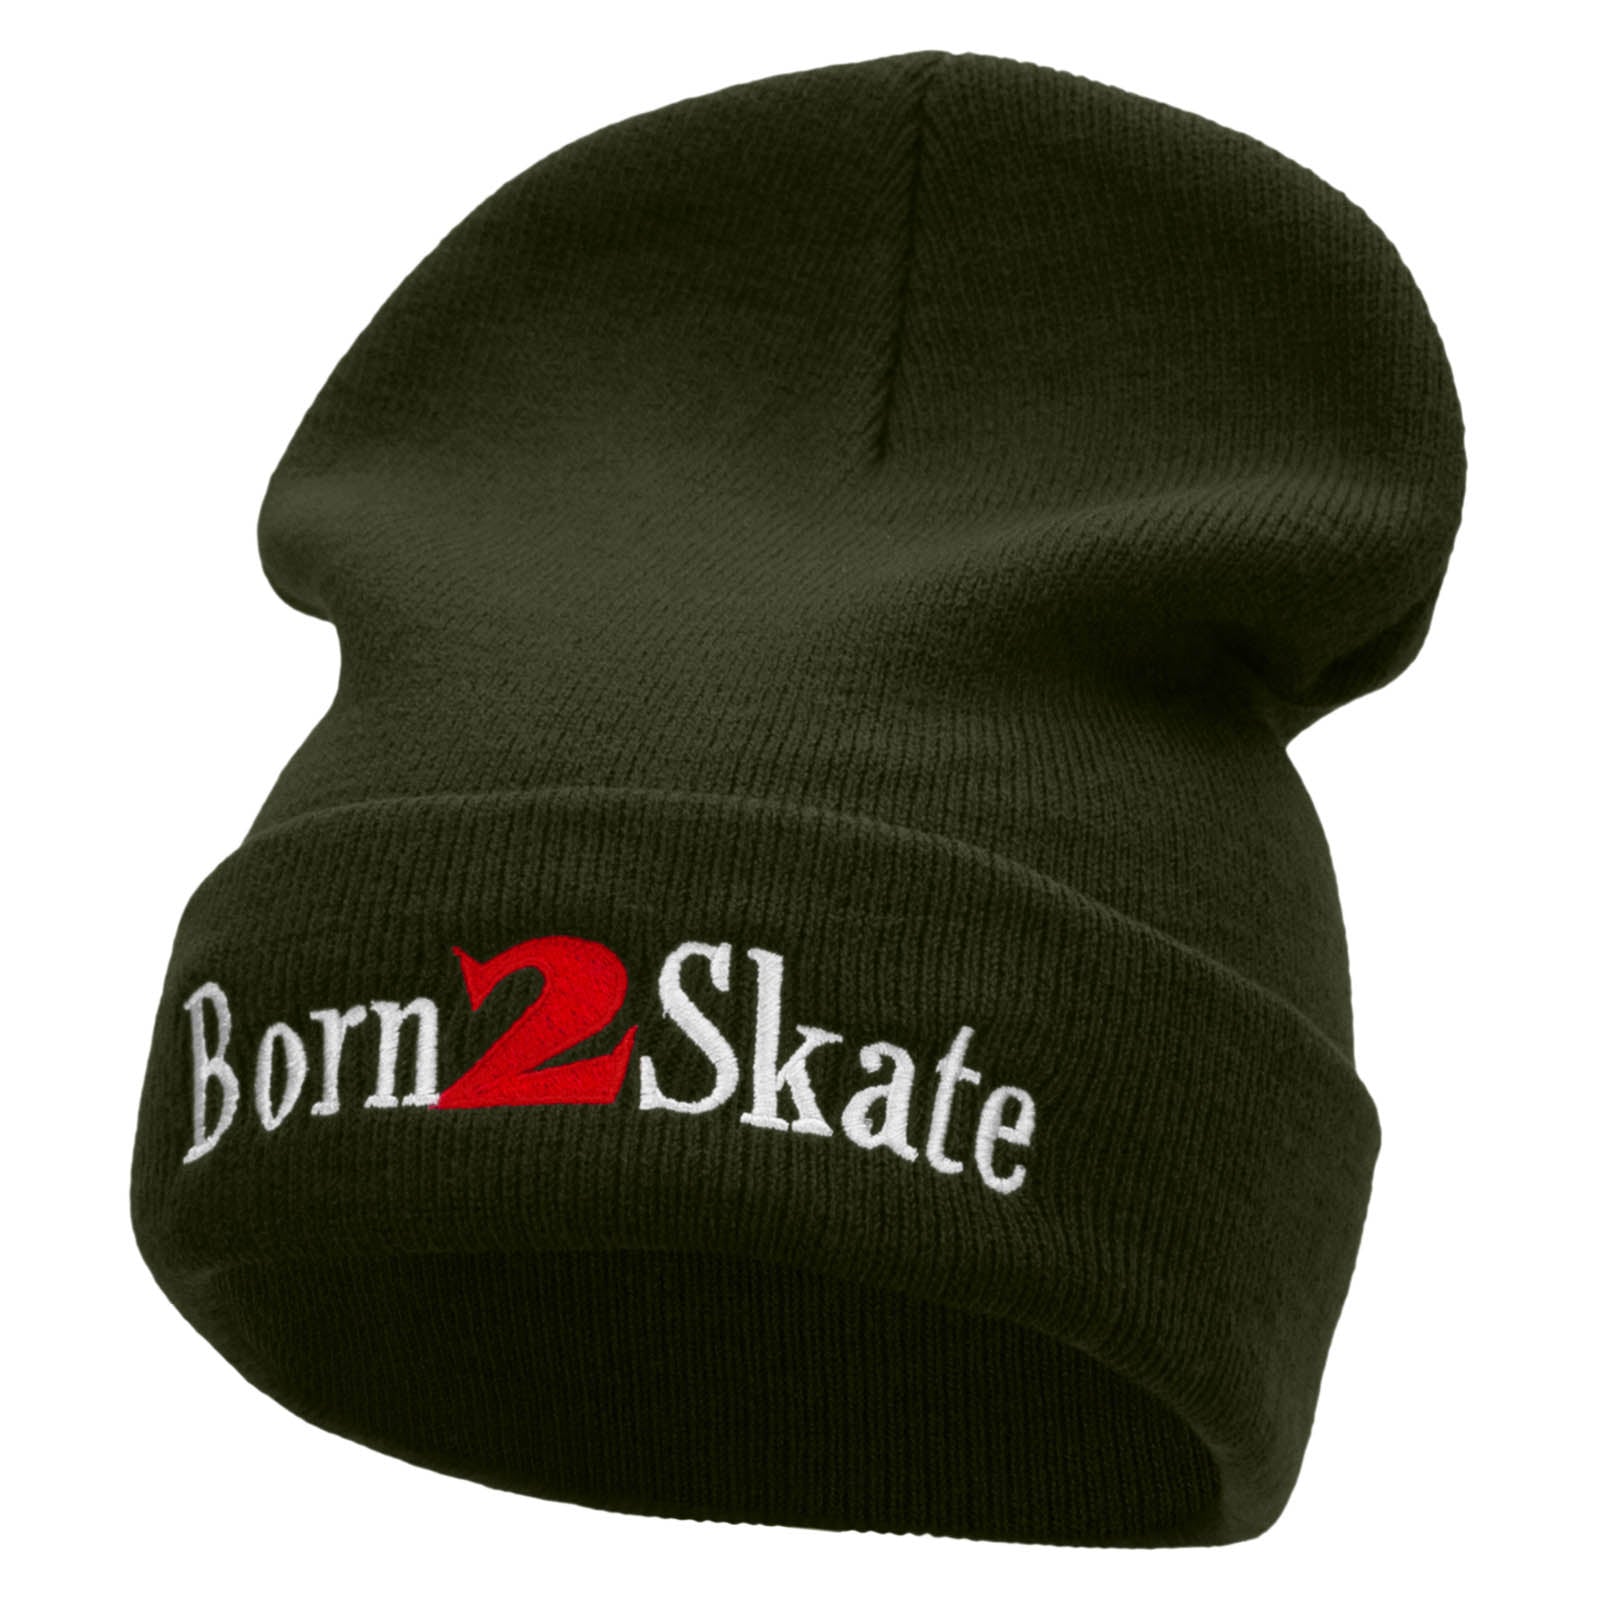 Born 2 Skate Embroidered 12 Inch Long Knitted Beanie - Olive OSFM